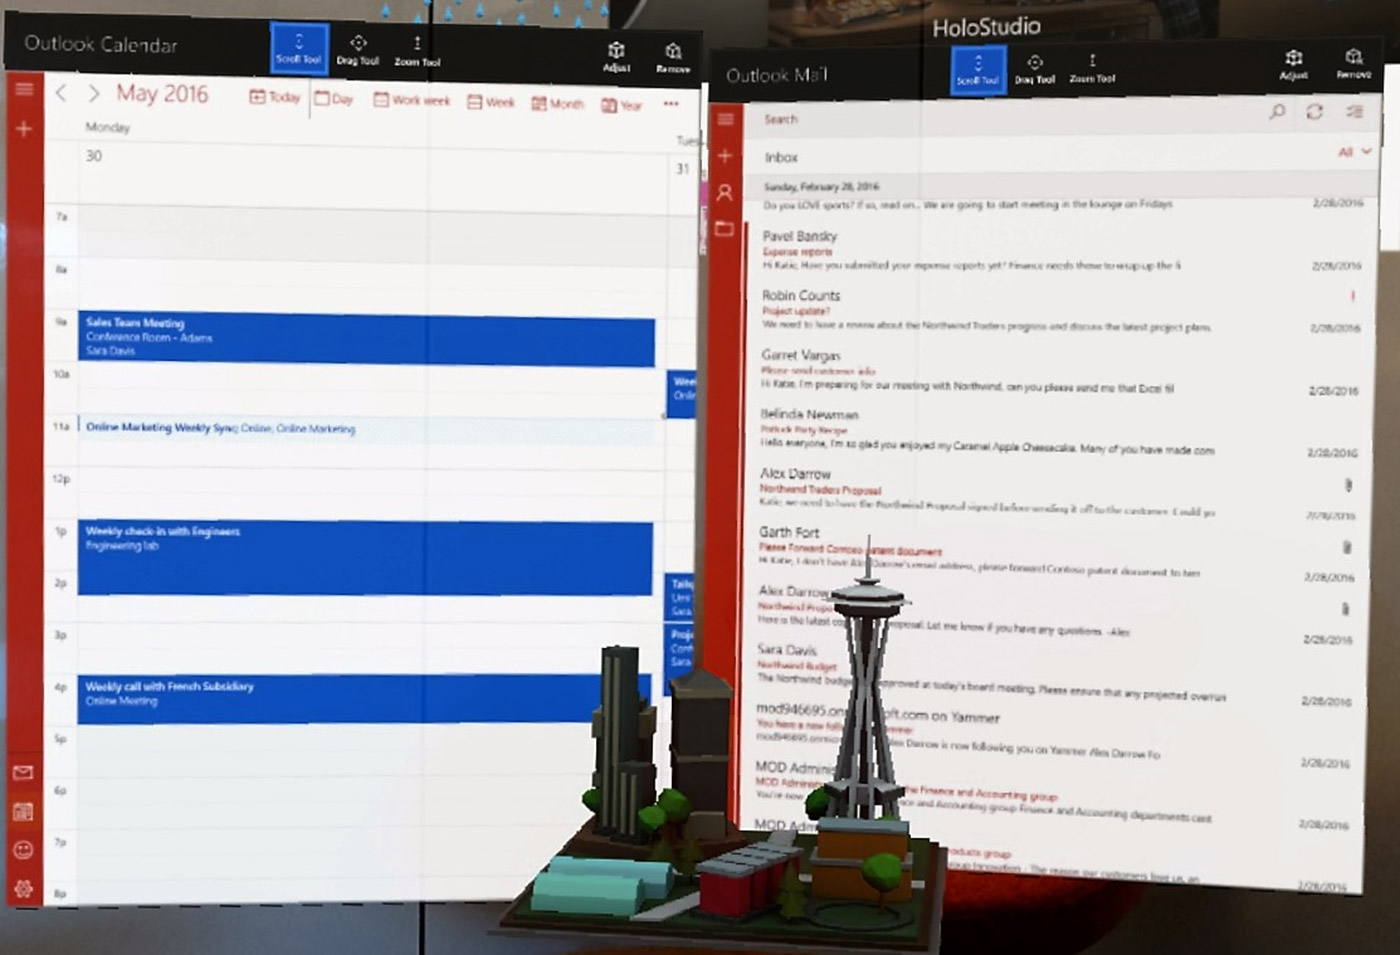 Microsoft brings Outlook mail and calendar to HoloLens